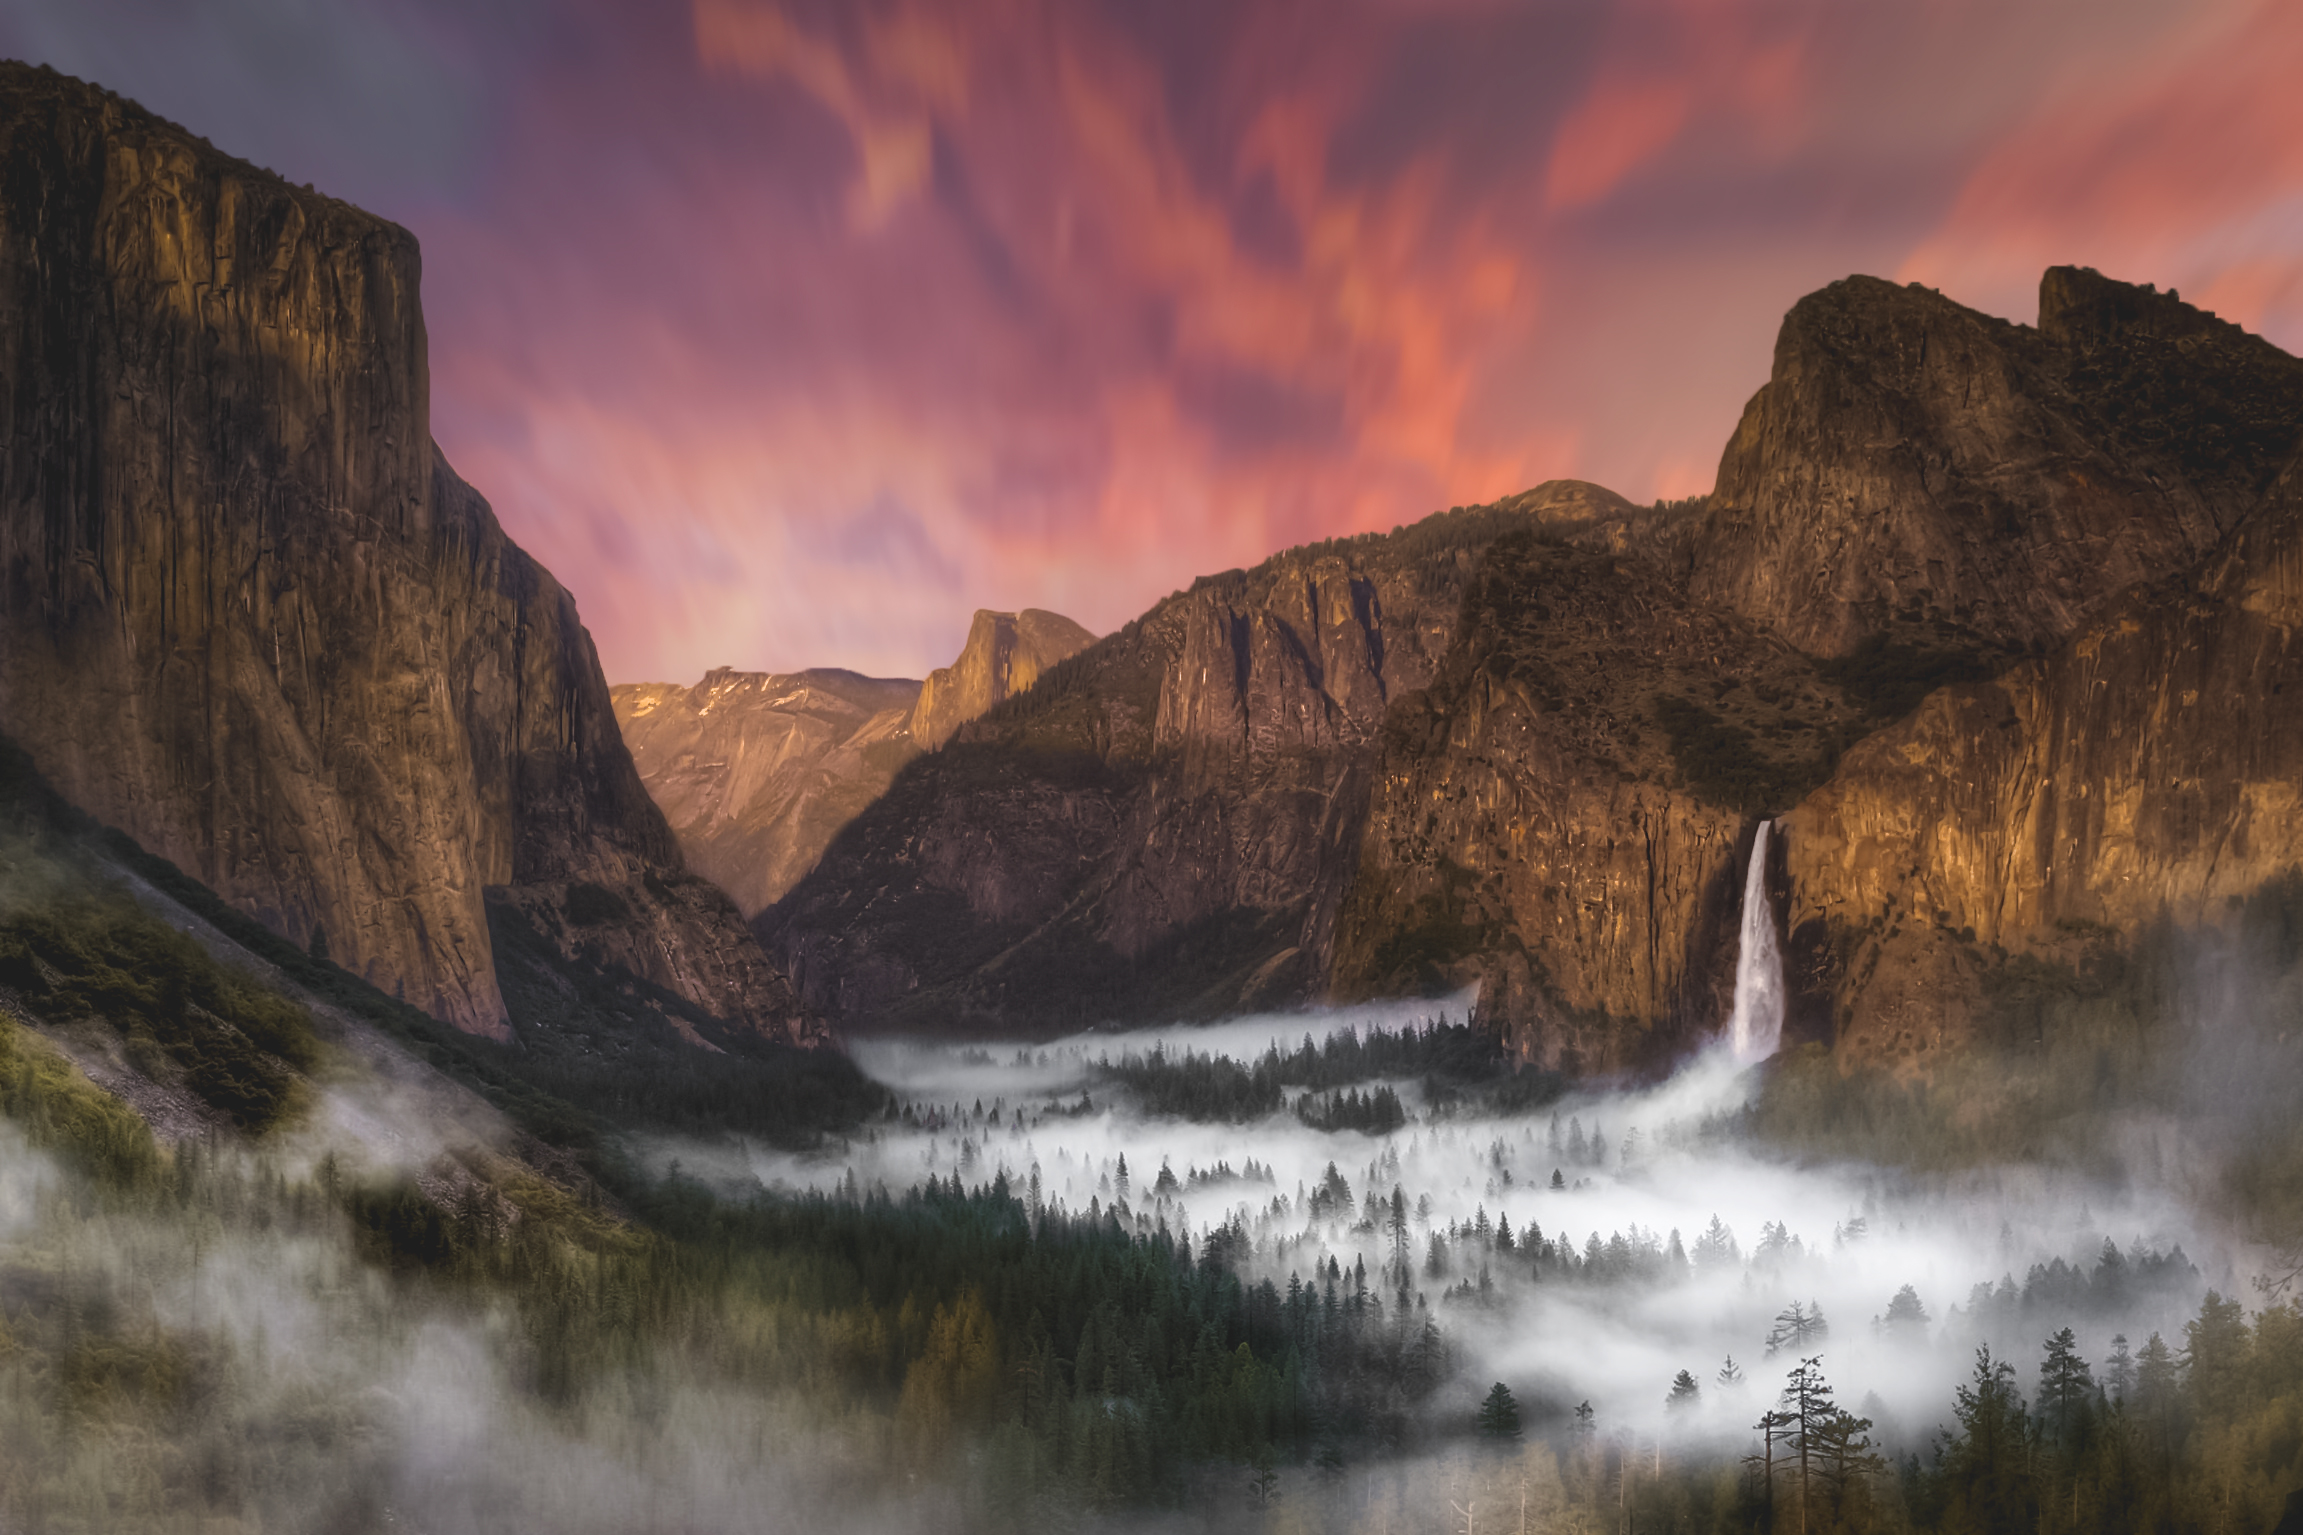 Yosemite National Park Yosemite Valley Nature Mountains Clouds Mist Trees Forest 2303x1535